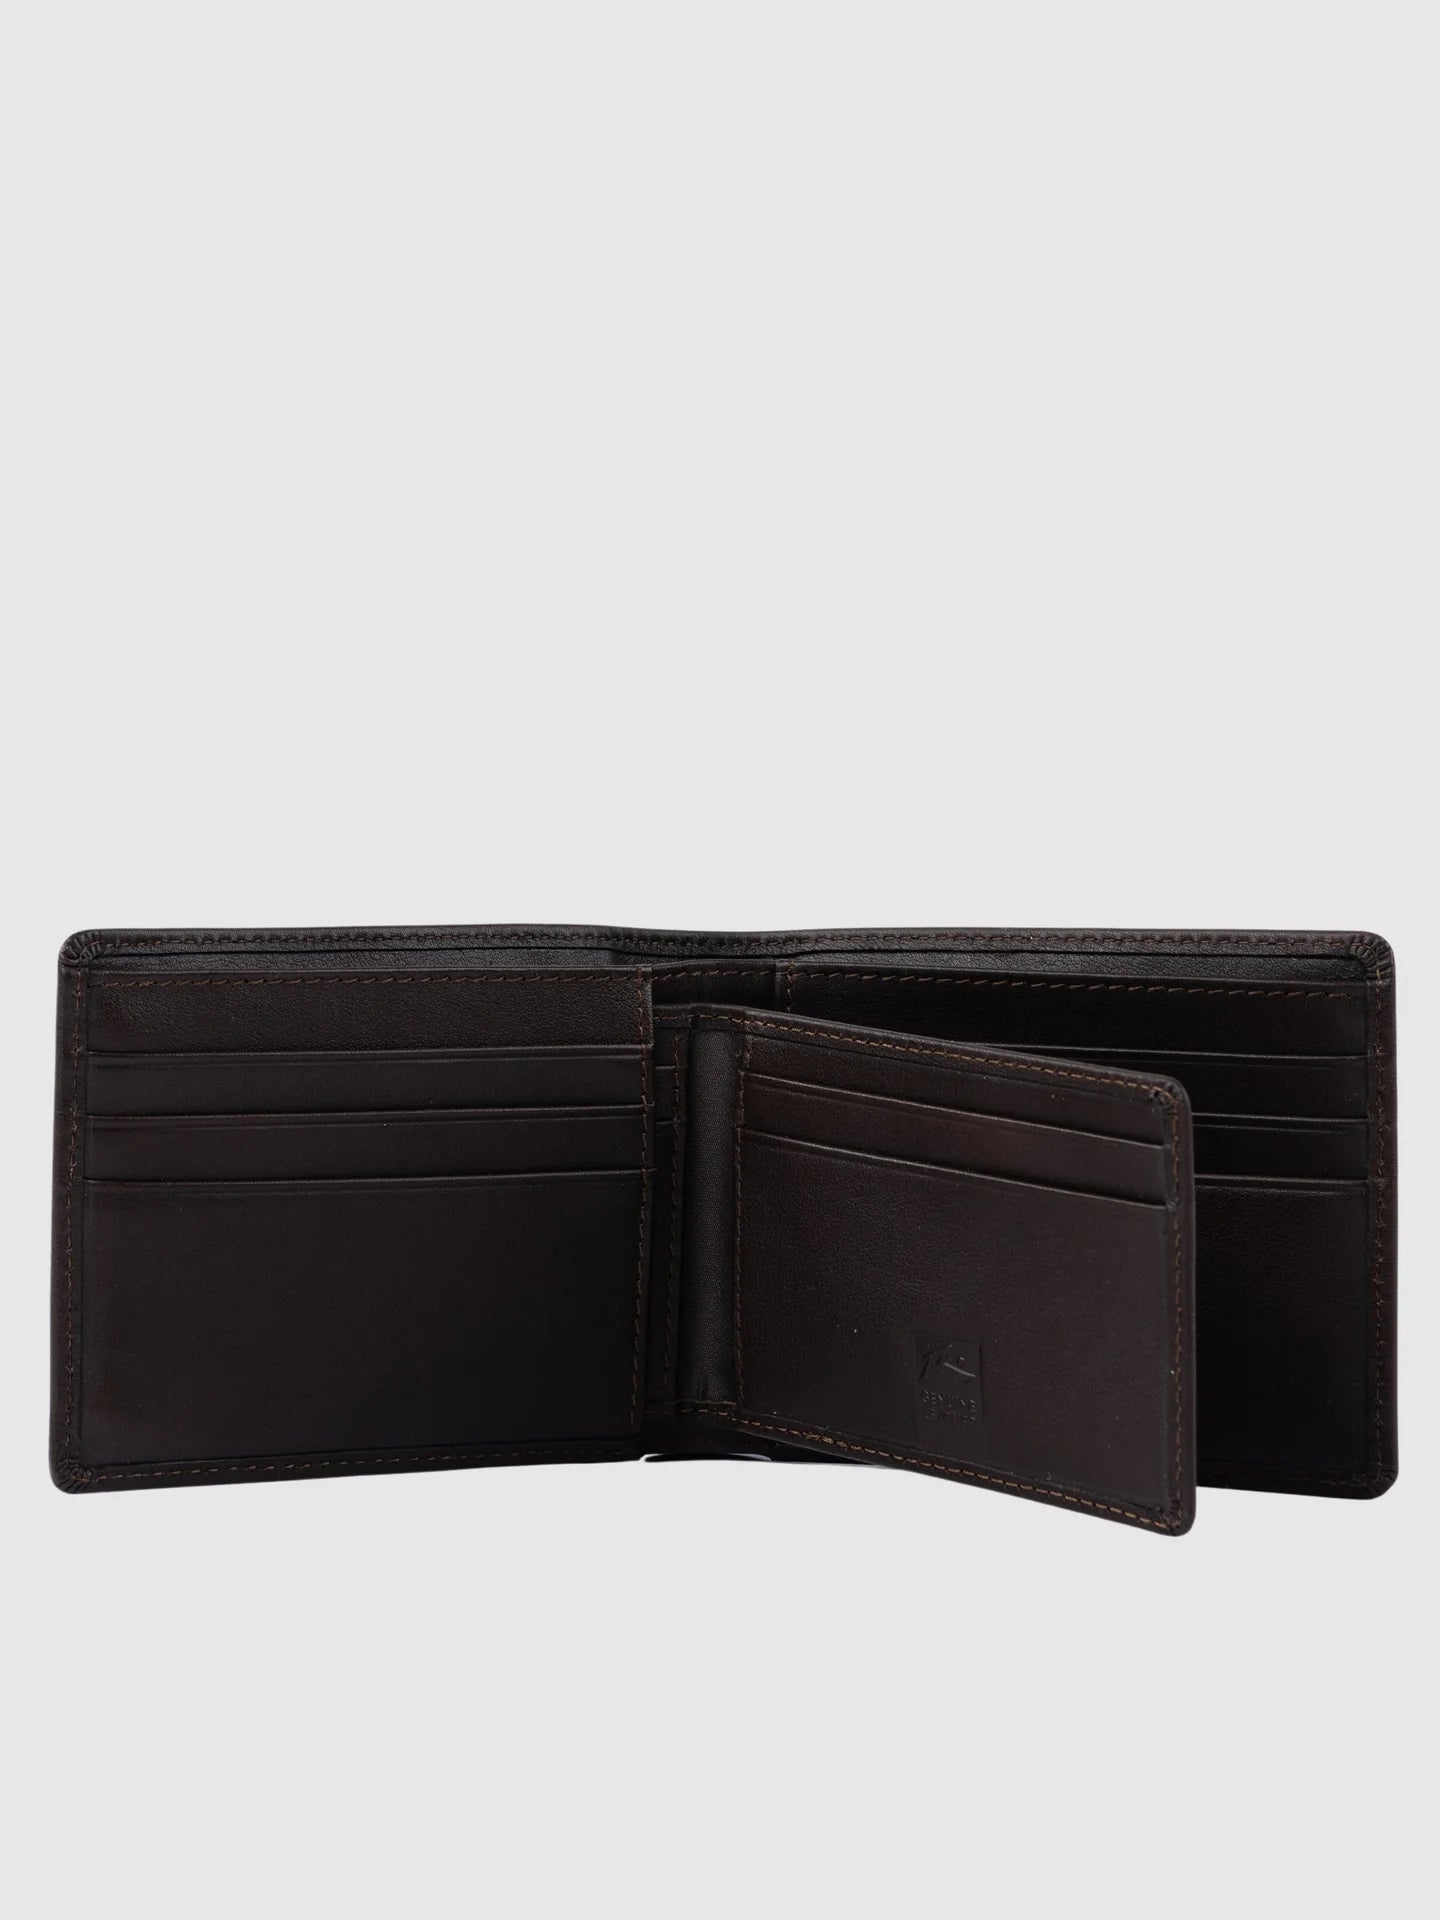 Rusty High River 2 Leather Wallet - Dark Coffee